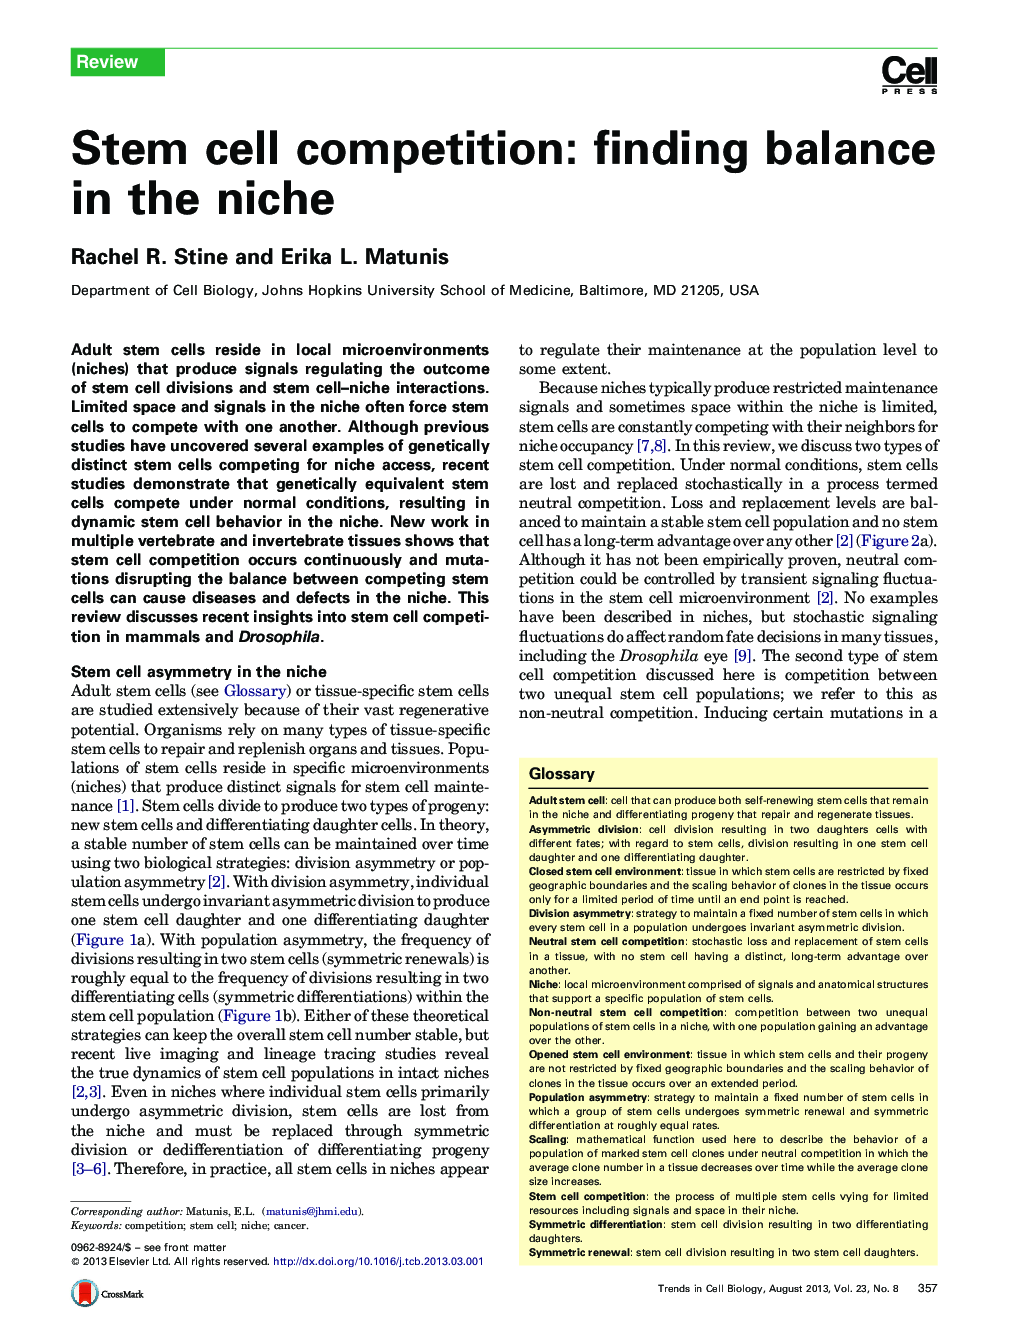 Stem cell competition: finding balance in the niche